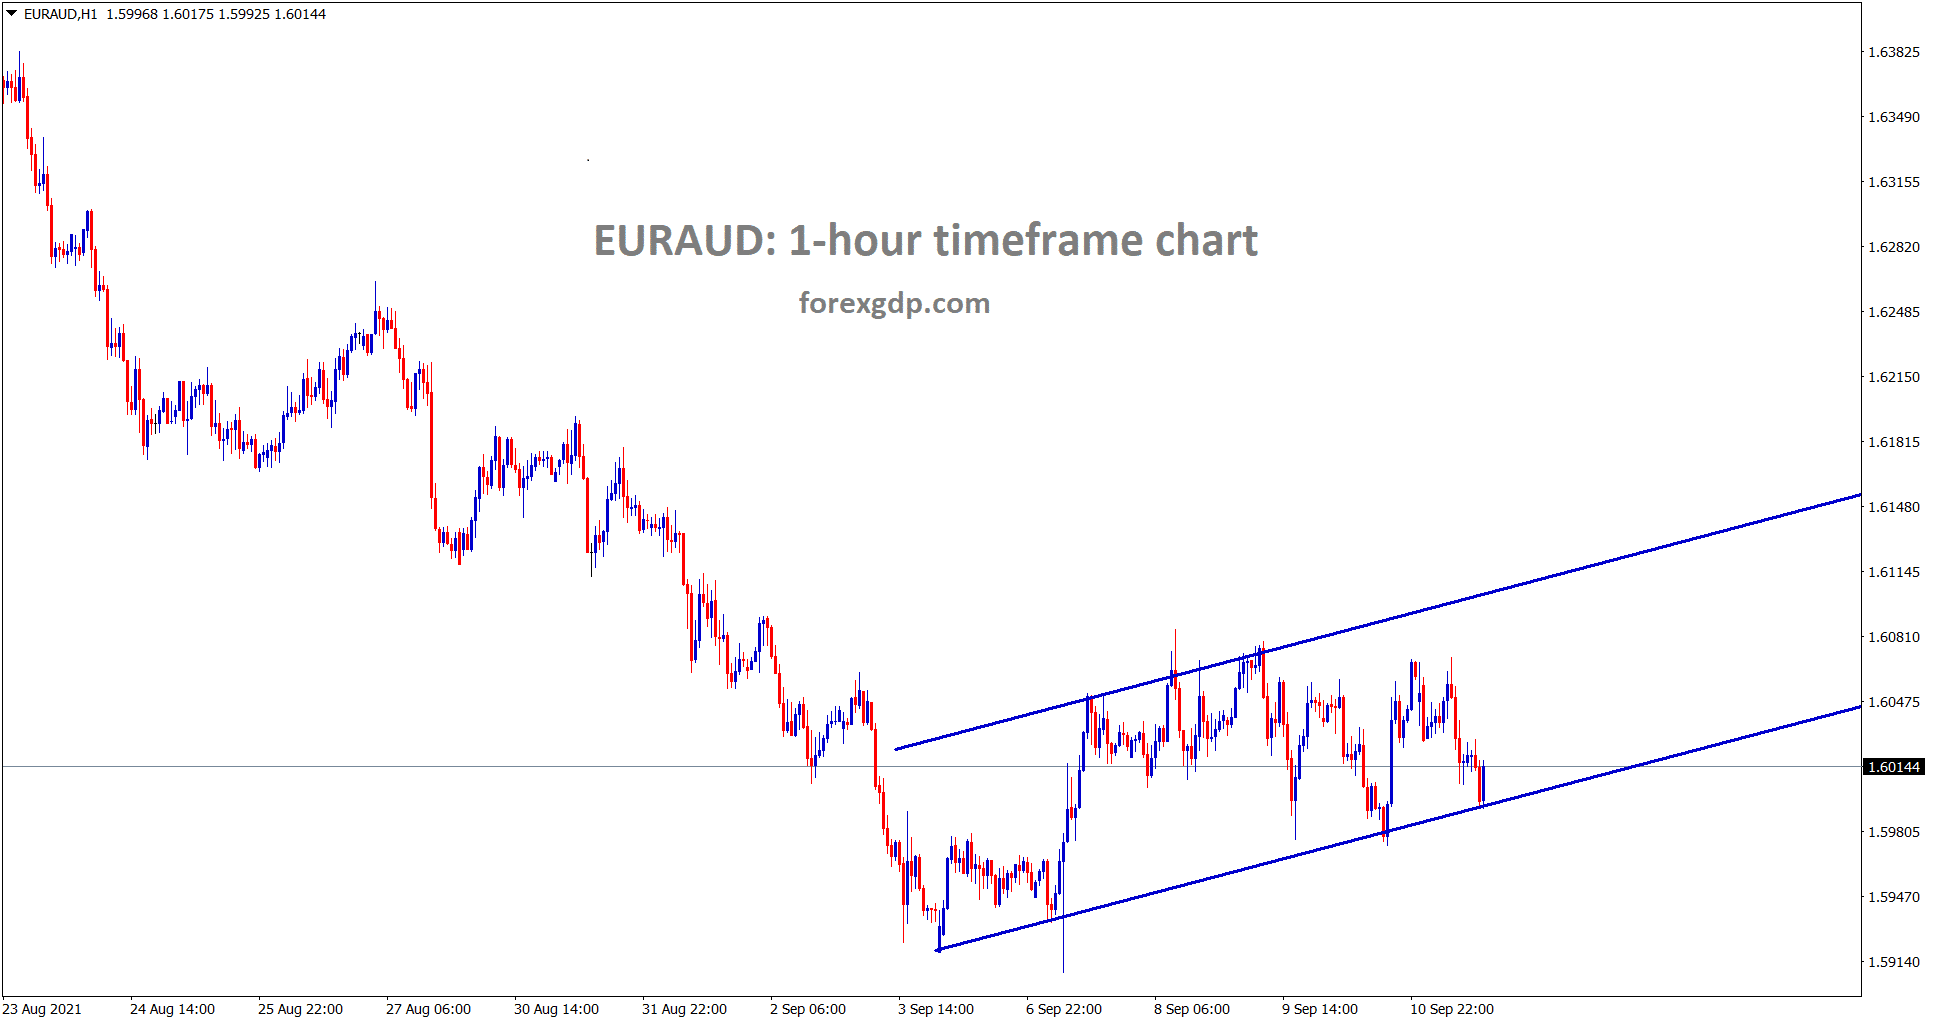 EURAUD is moving in a minor ascending channel